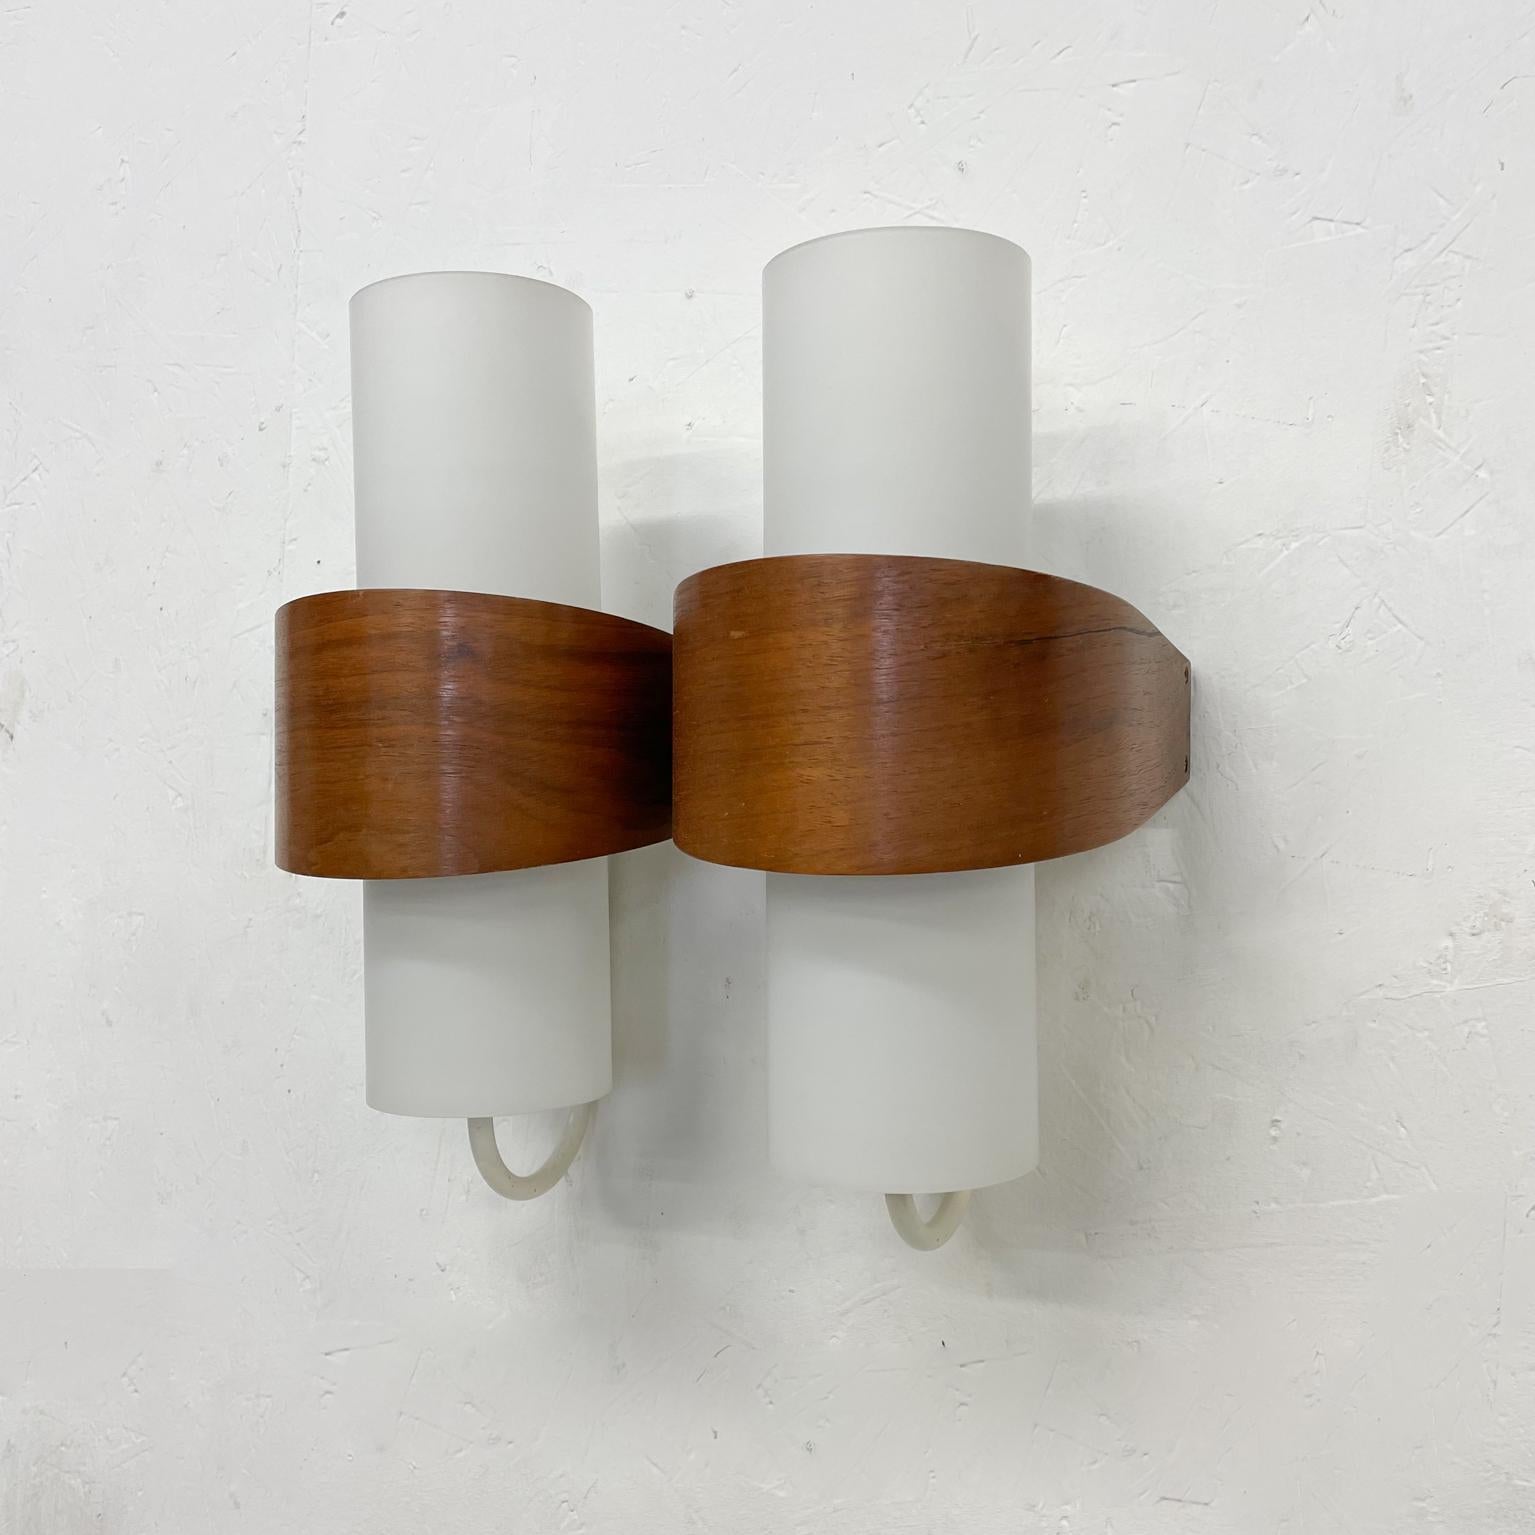 Wall sconces
Elegant geometric sconces composed of opaque glass cylinders with a teak wrap.
Vintage Modern NX40 Wall Lamps Teak and Glass Louis Kalff for Philips Holland 1960s
In the style of Kalmar sconce lighting
Measures: 14.5 tall x 7.5 deep